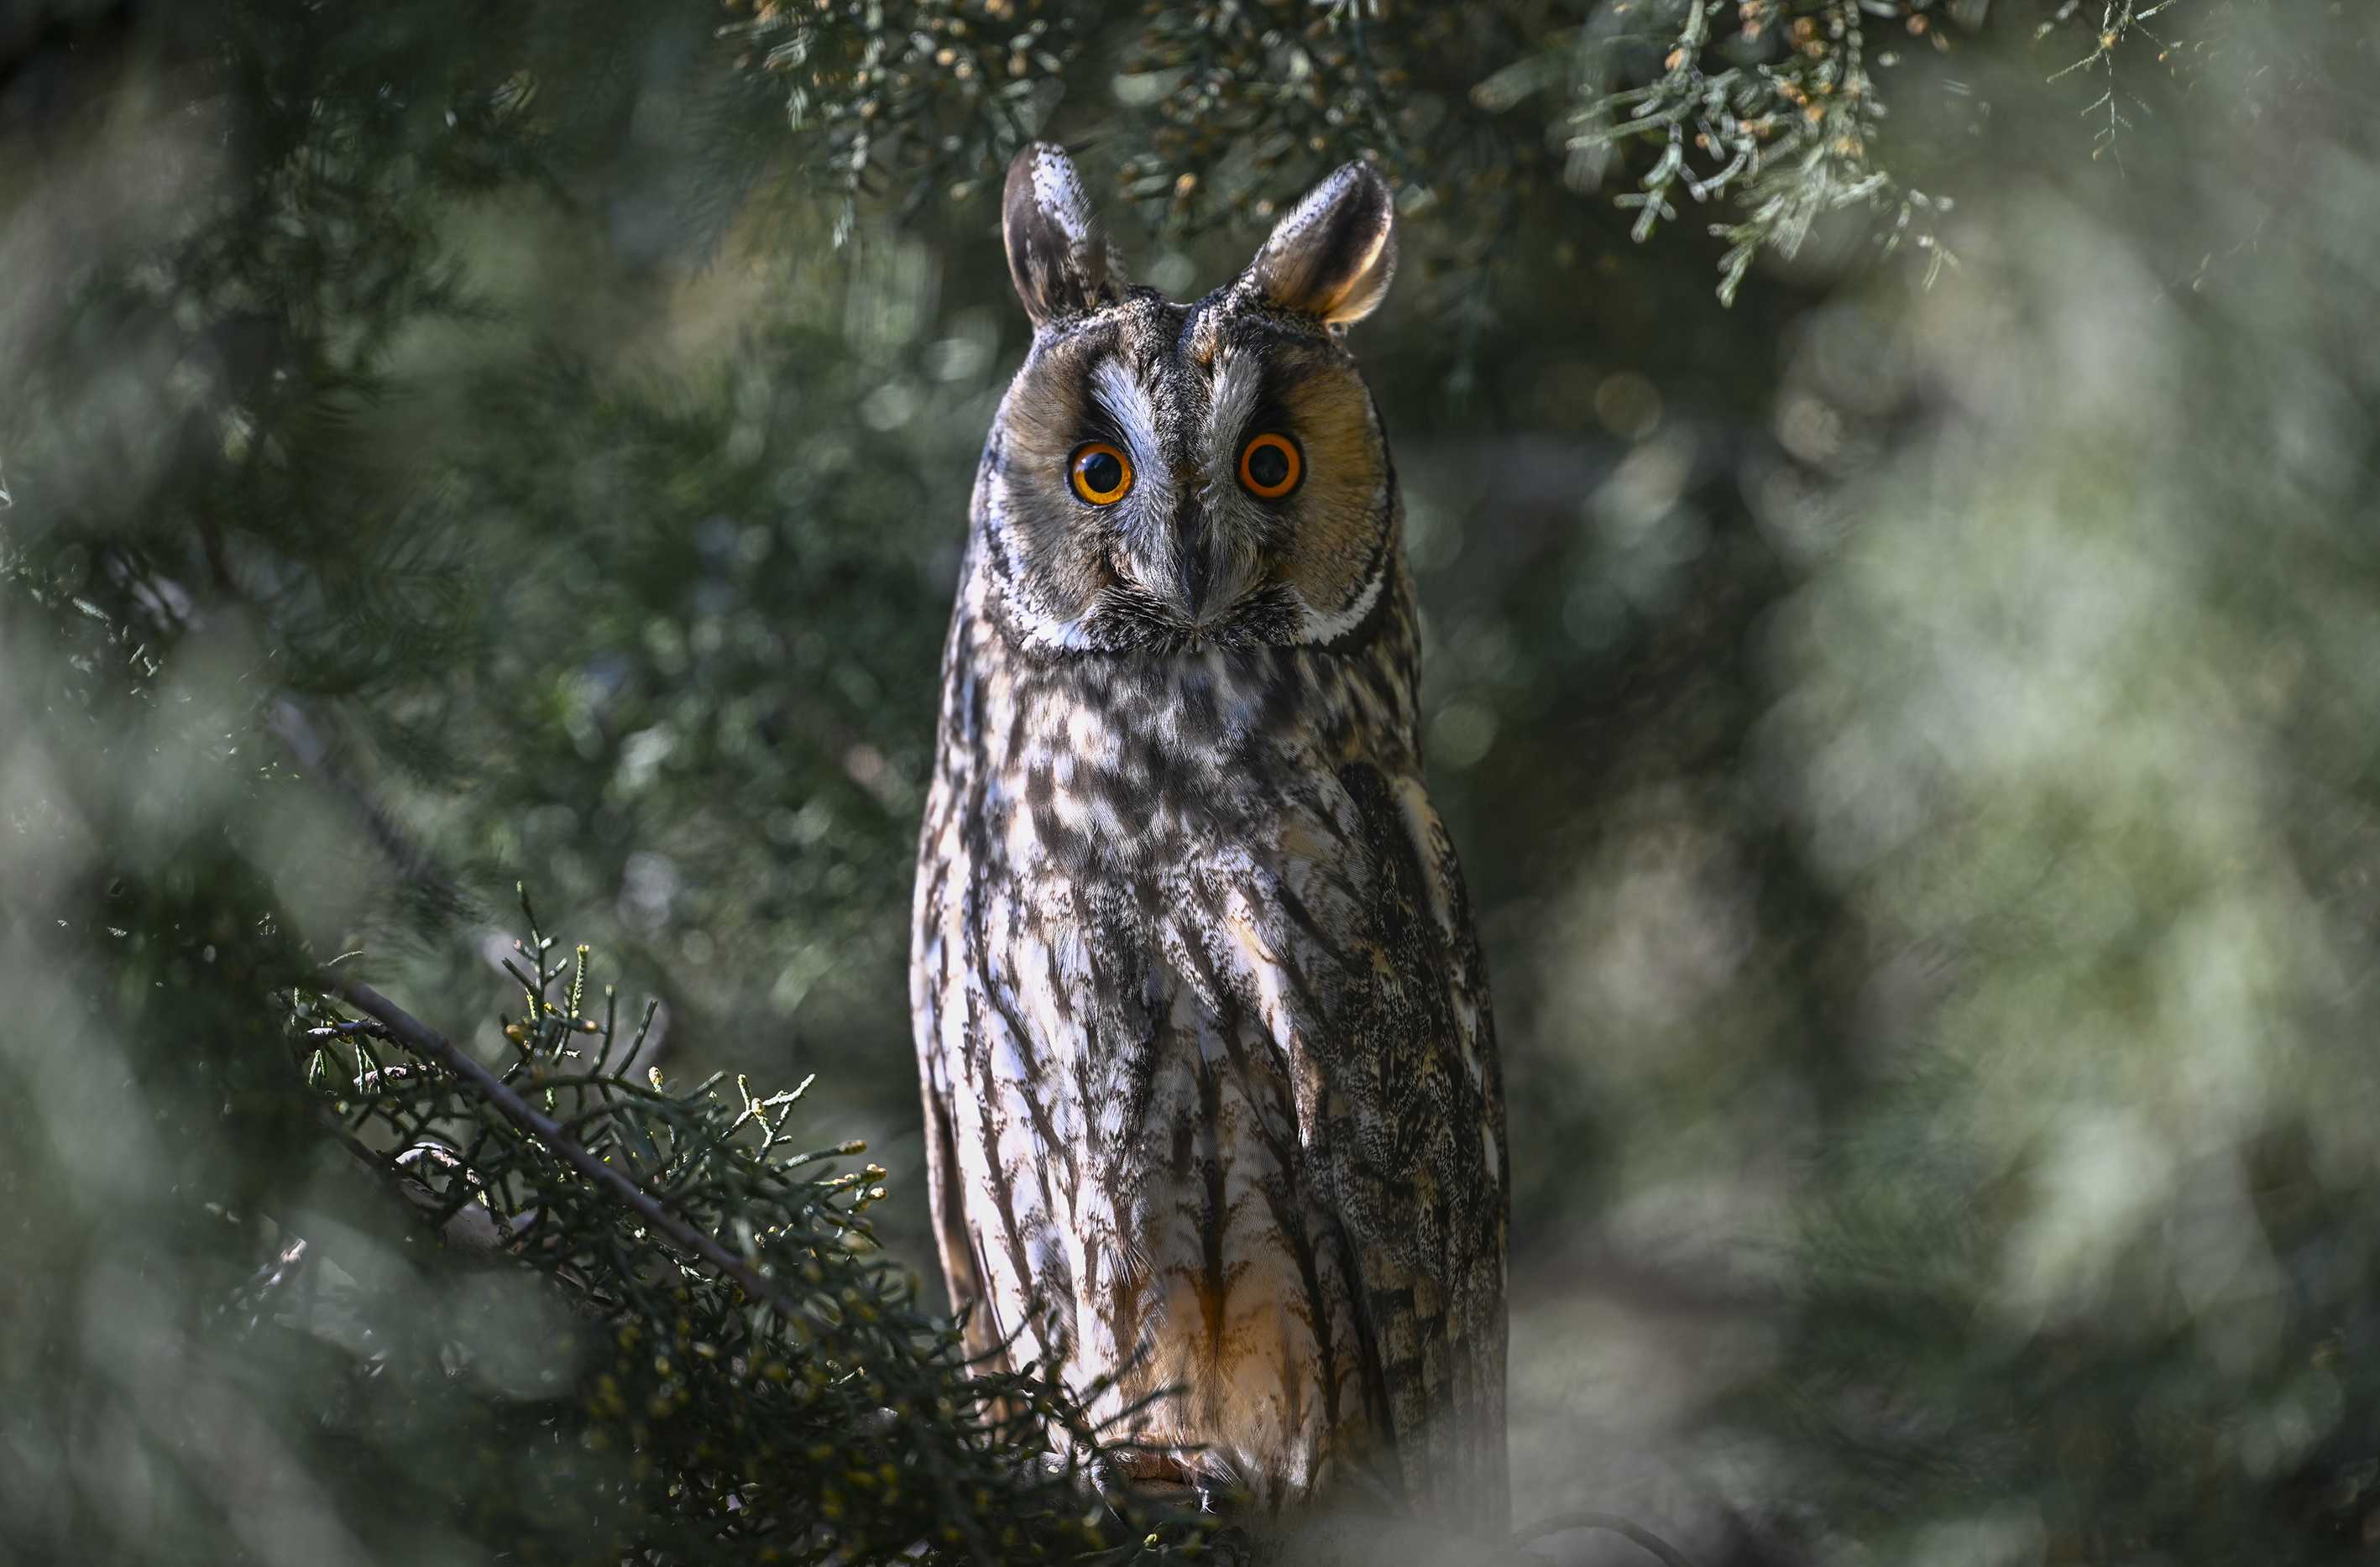 Eared forest owl